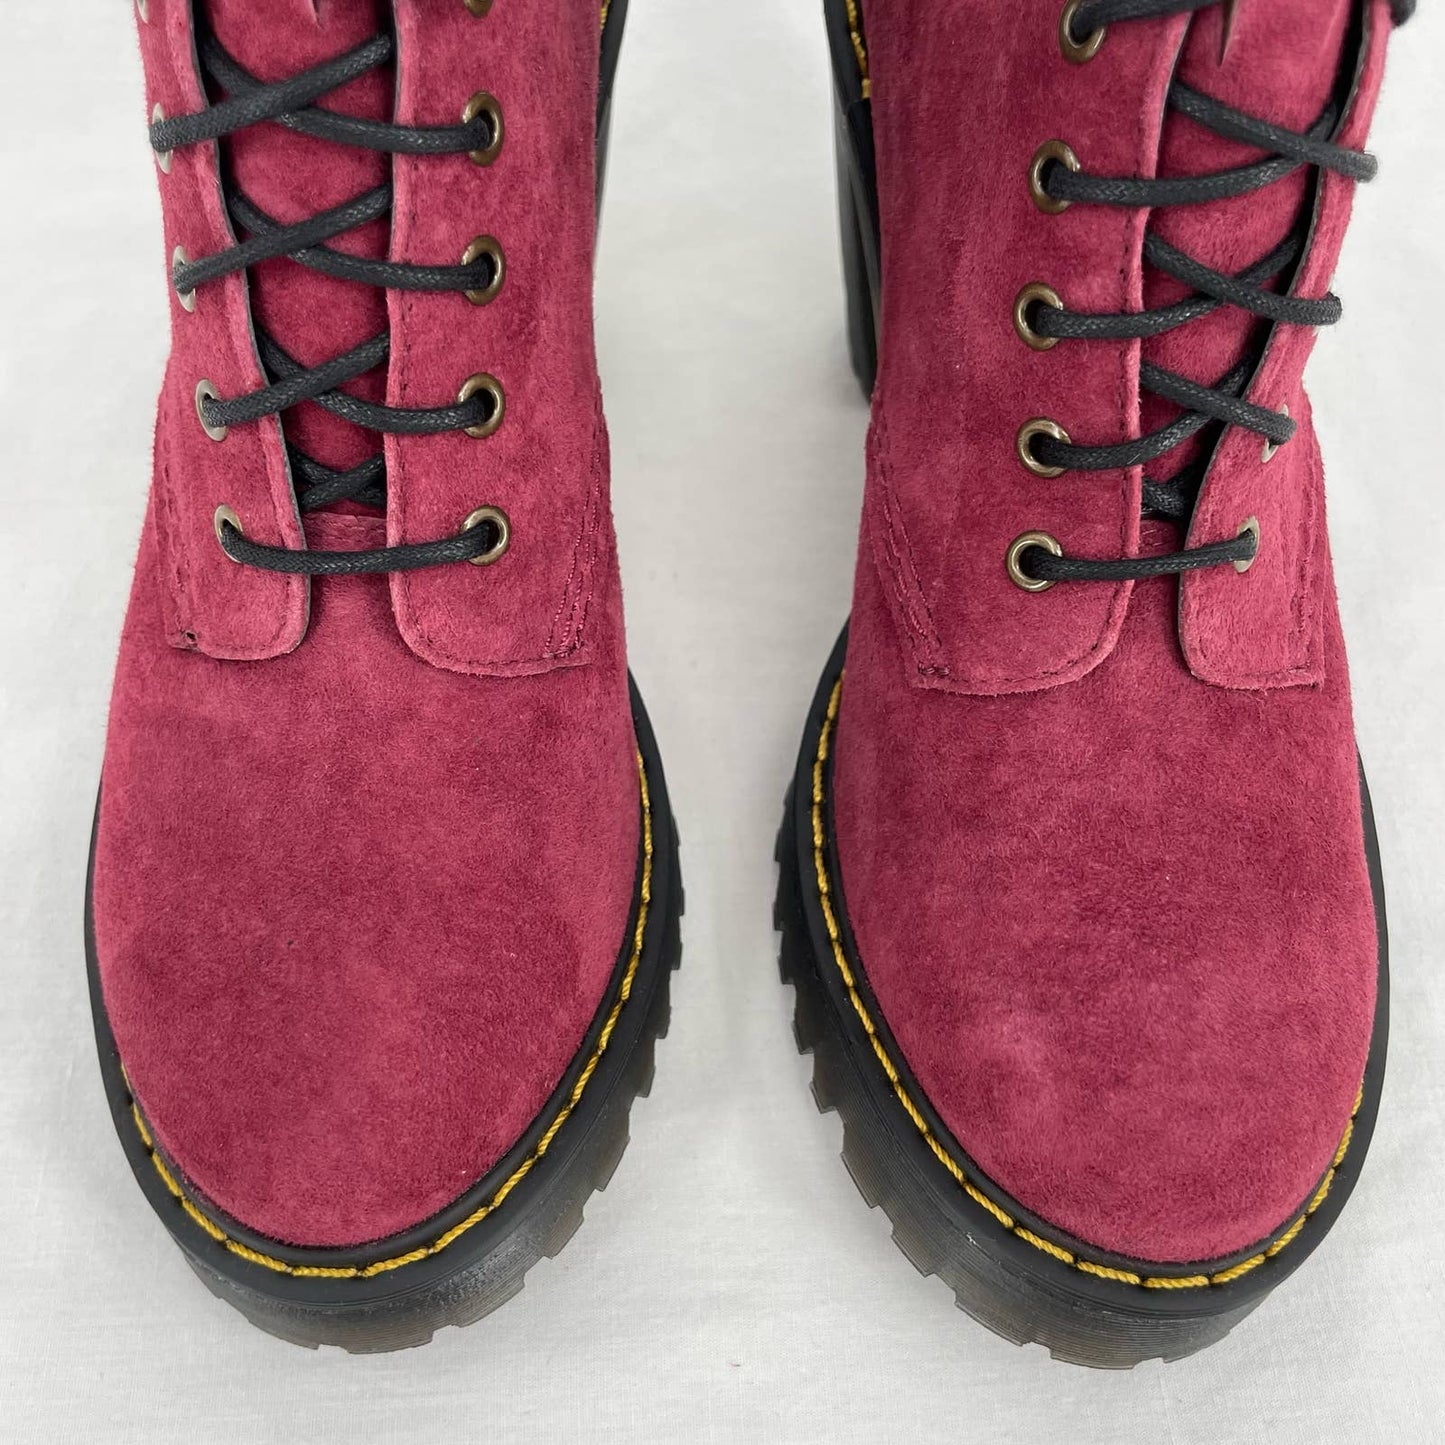 Dr. Martens Kendra Red Suede High Heels Leather Lace Up Witchy Heeled Boots Size 6